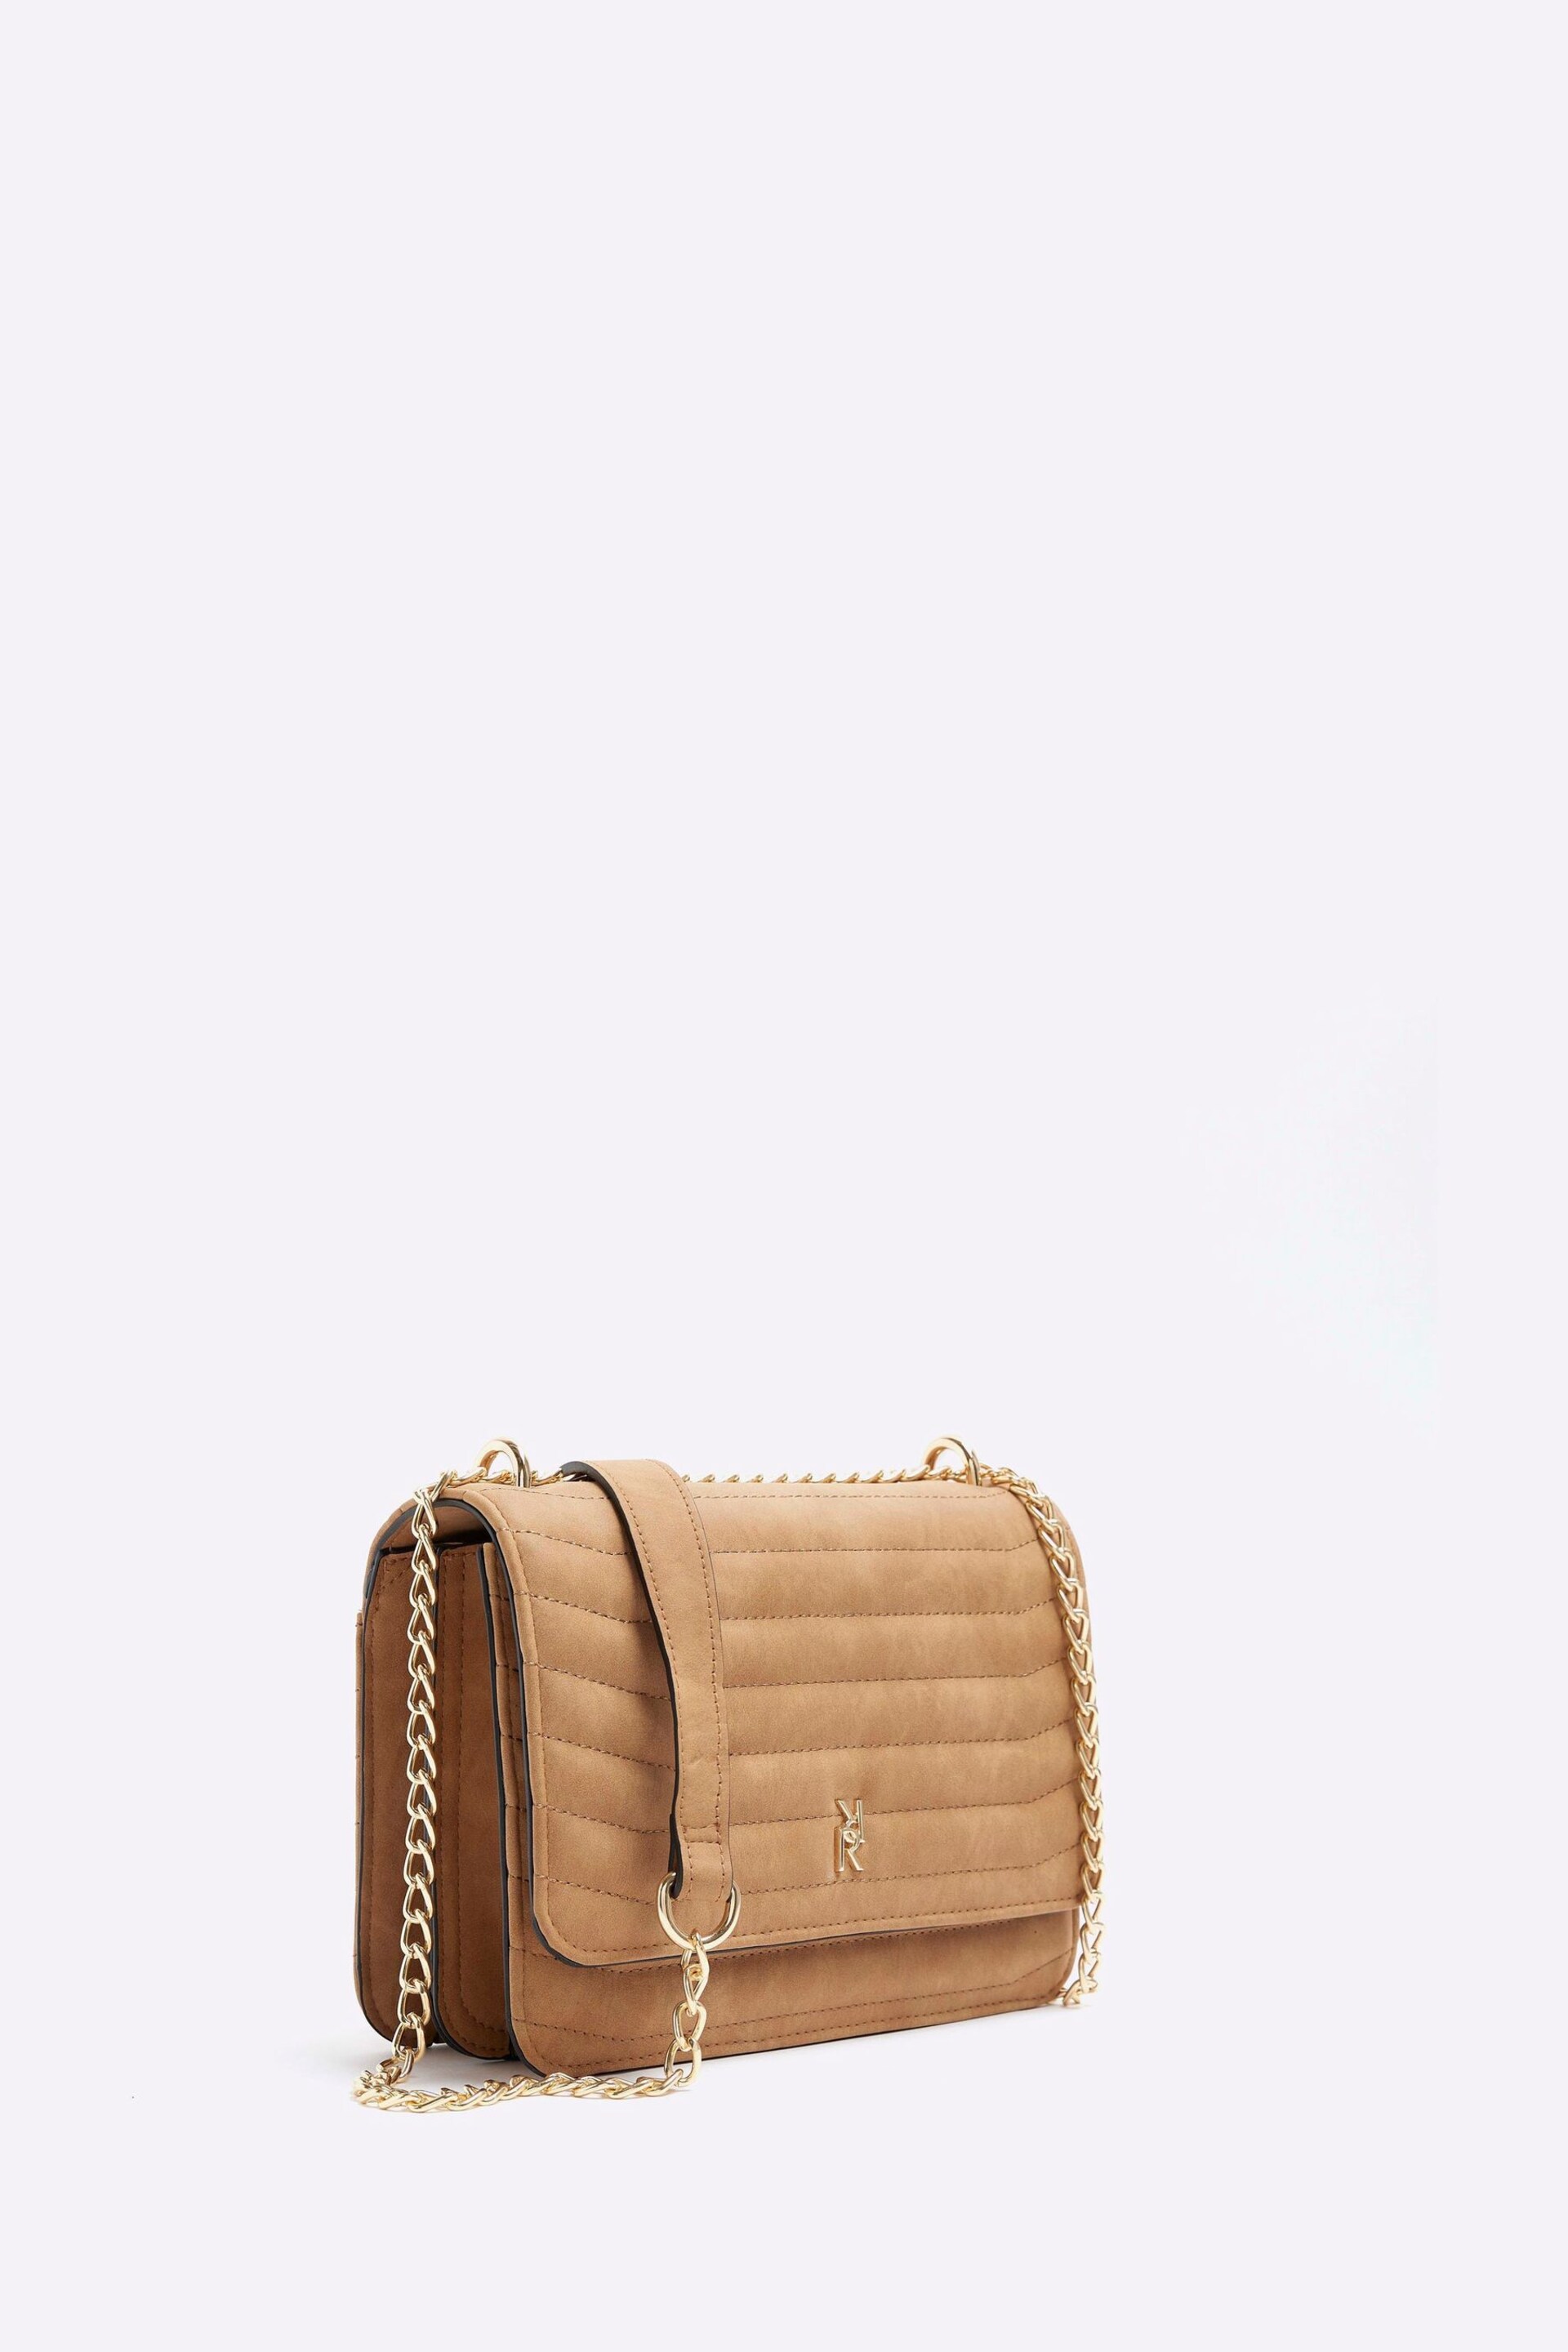 River Island Brown Quilted Chain Shoulder Bag - Image 2 of 4